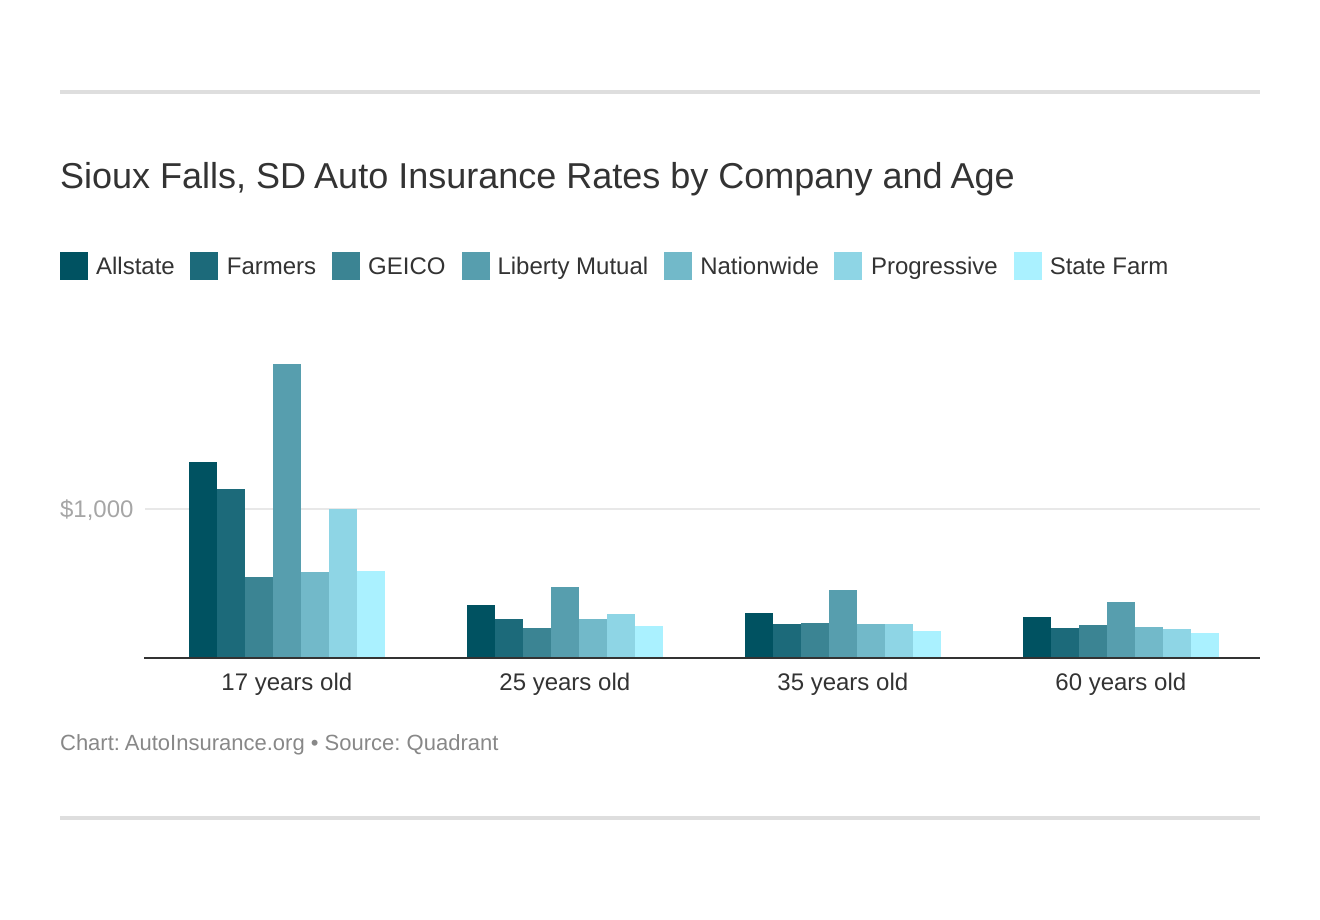 Sioux Falls, SD Auto Insurance Rates by Company and Age